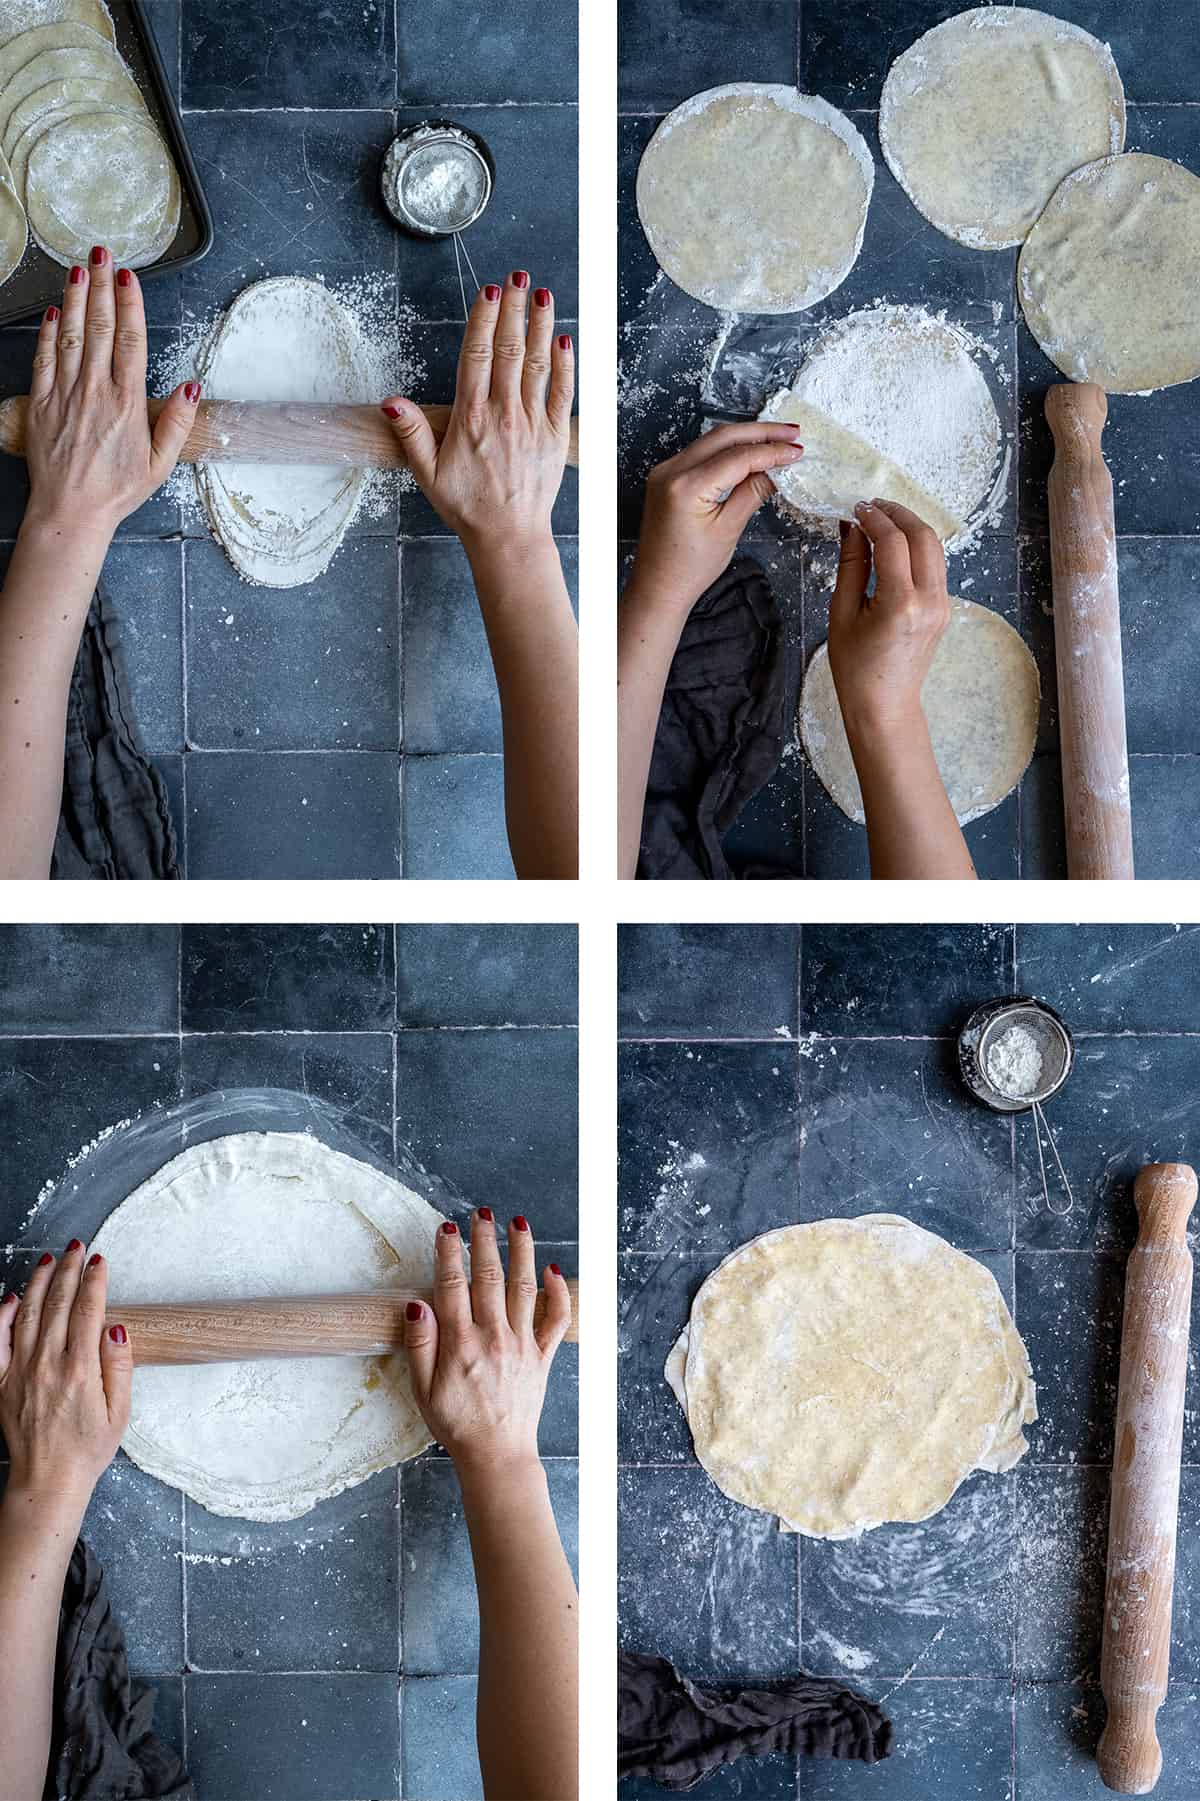 A collage of four pictures showing the steps of making baklava dough.